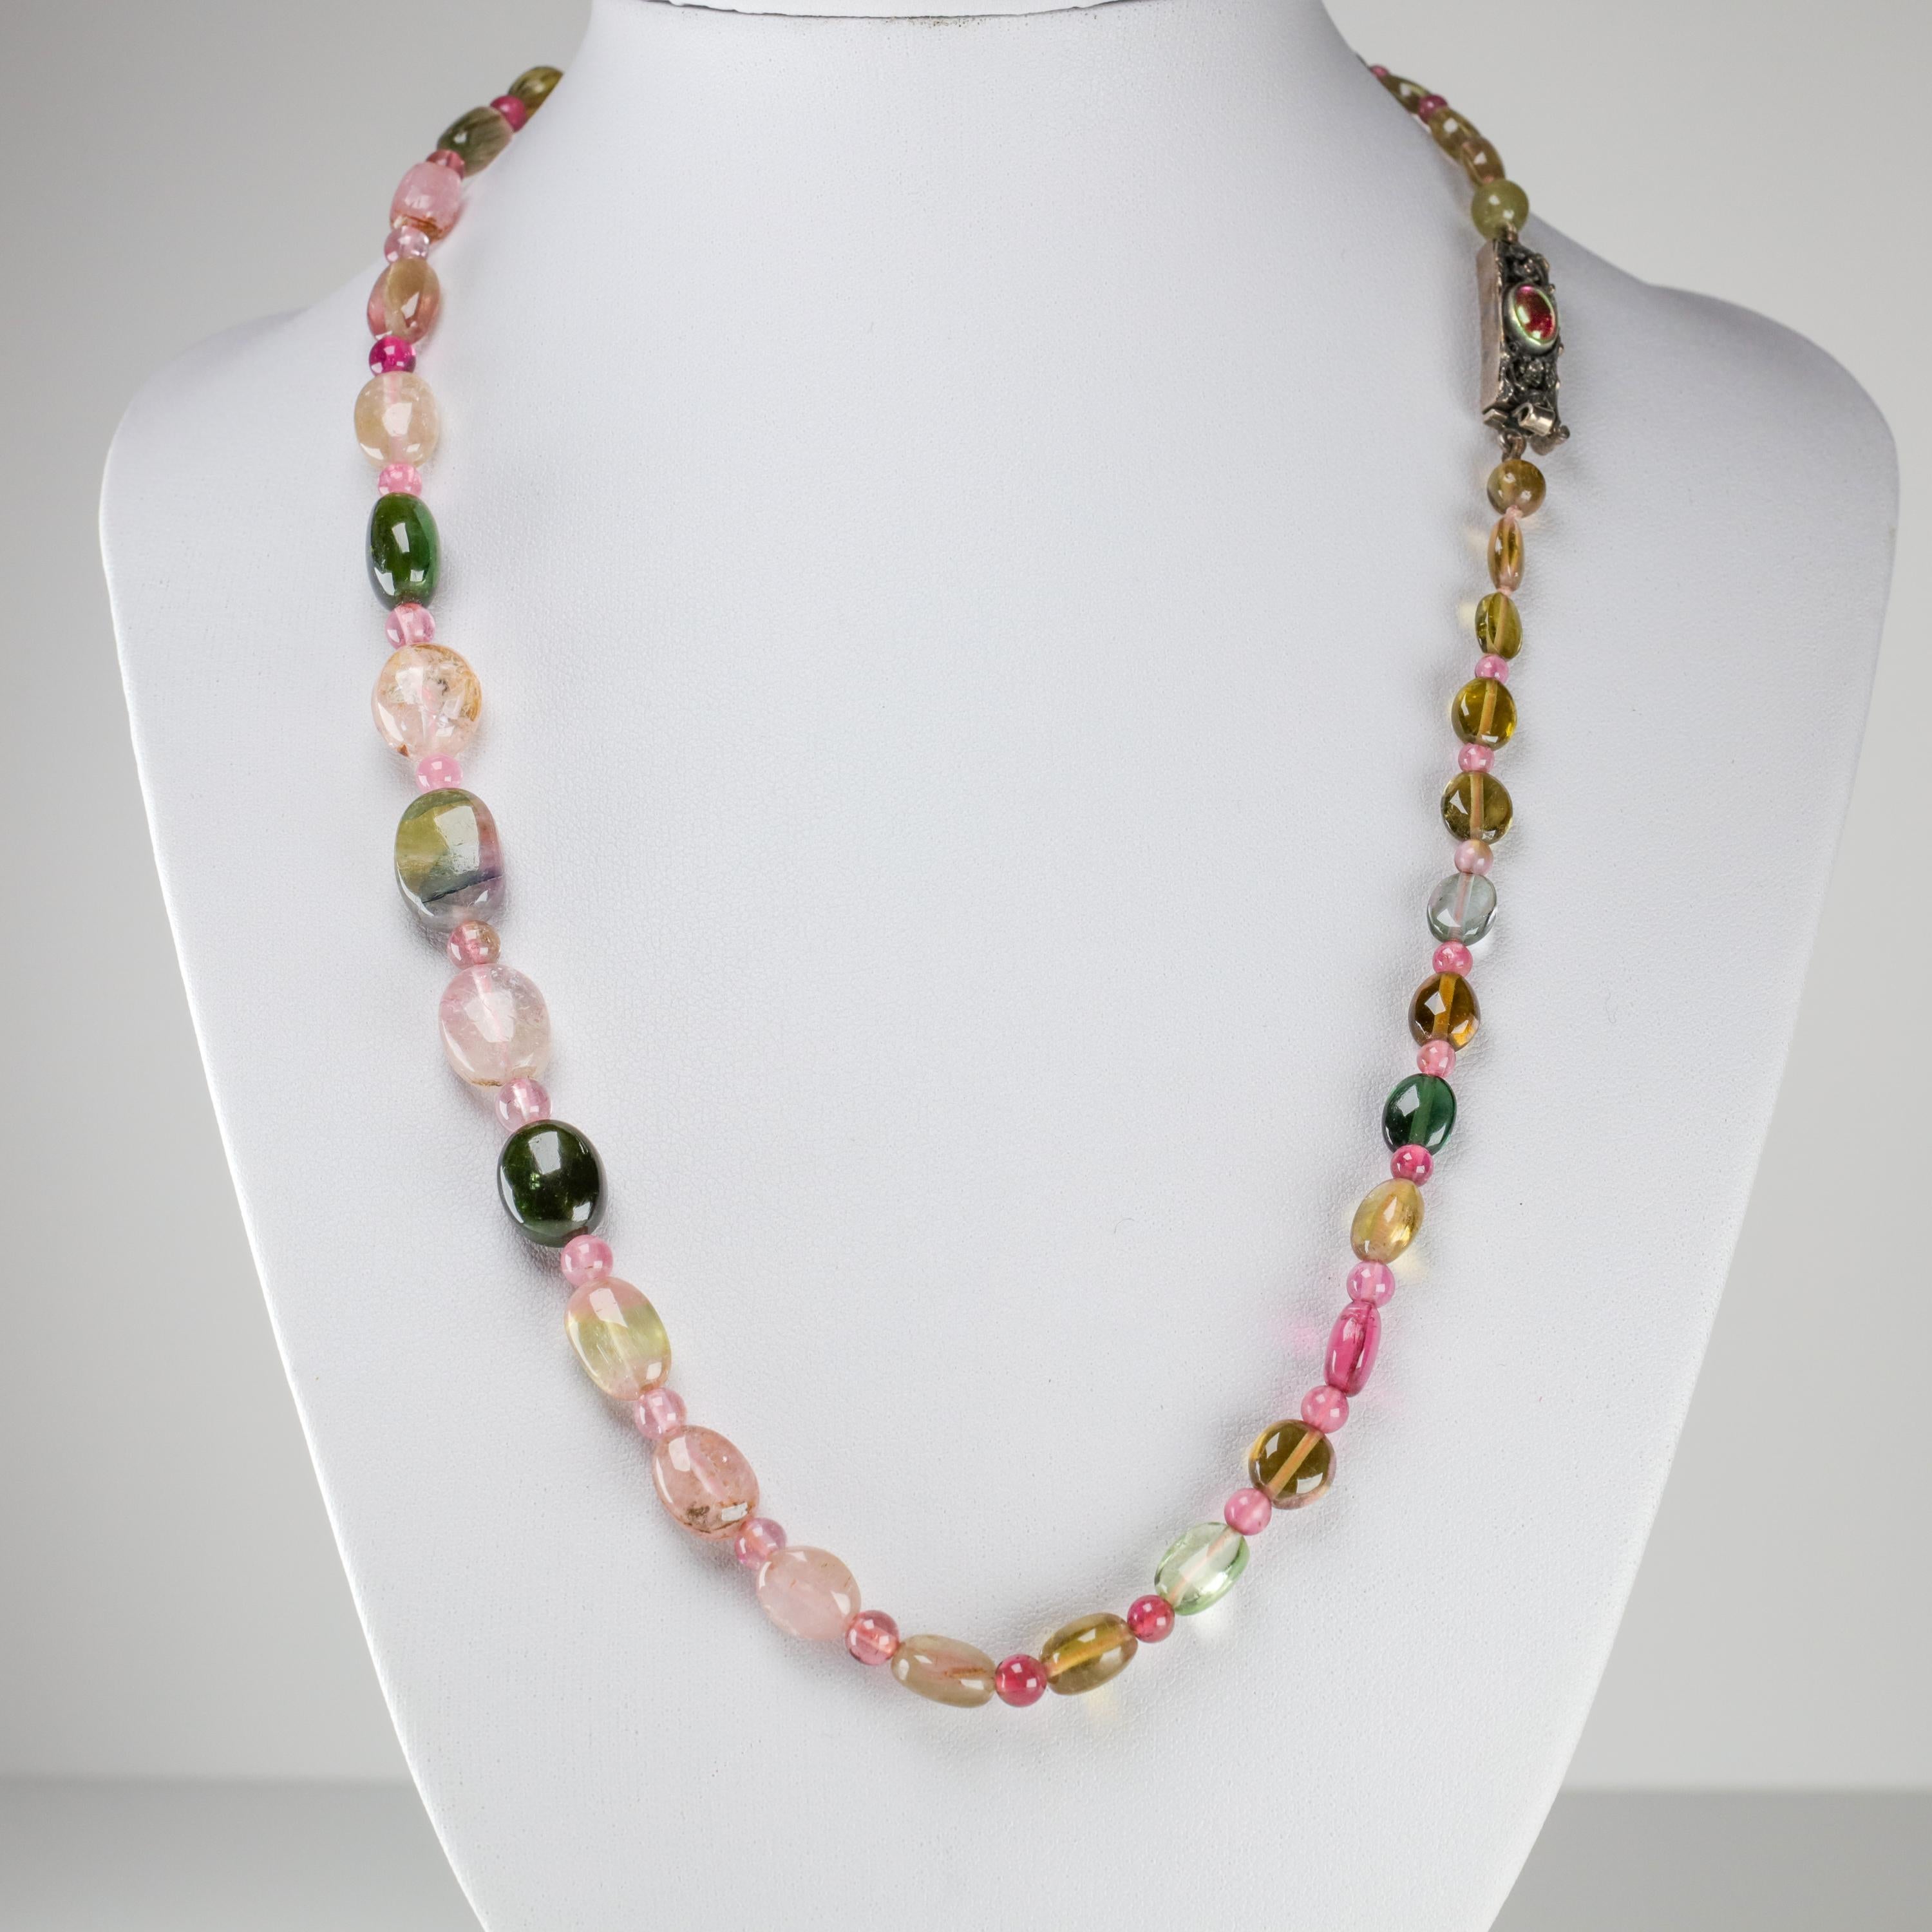 A bright and colorful treasure from the Arts & Crafts period, this English-made necklace is composed of thirty-seven very fine oblong tourmaline beads graduating in size from approximately 8mm to just shy of 14mm. Between these beads are thirty-four